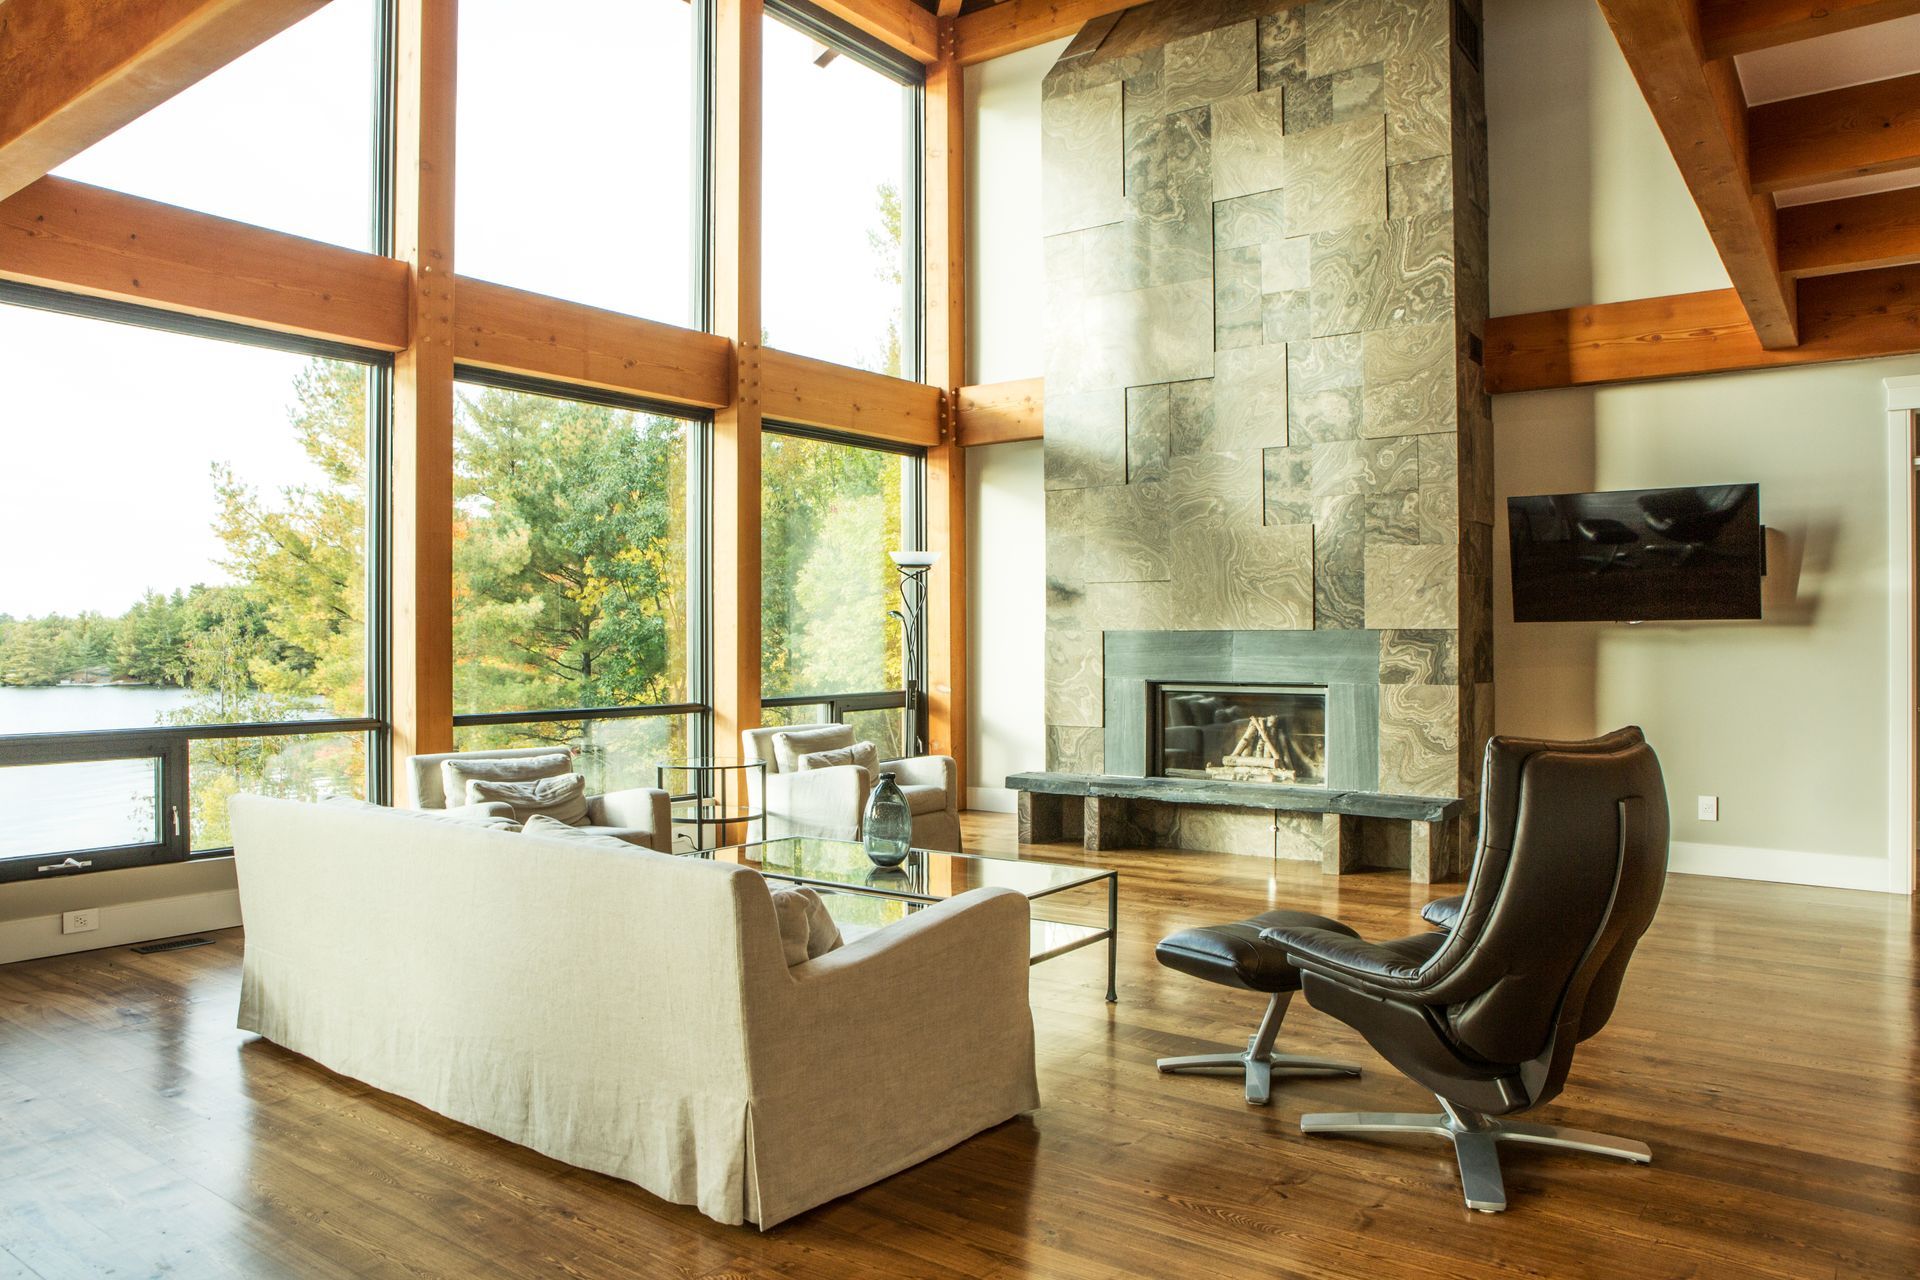 Modern living room with oversized windows and tall tiled fireplace.